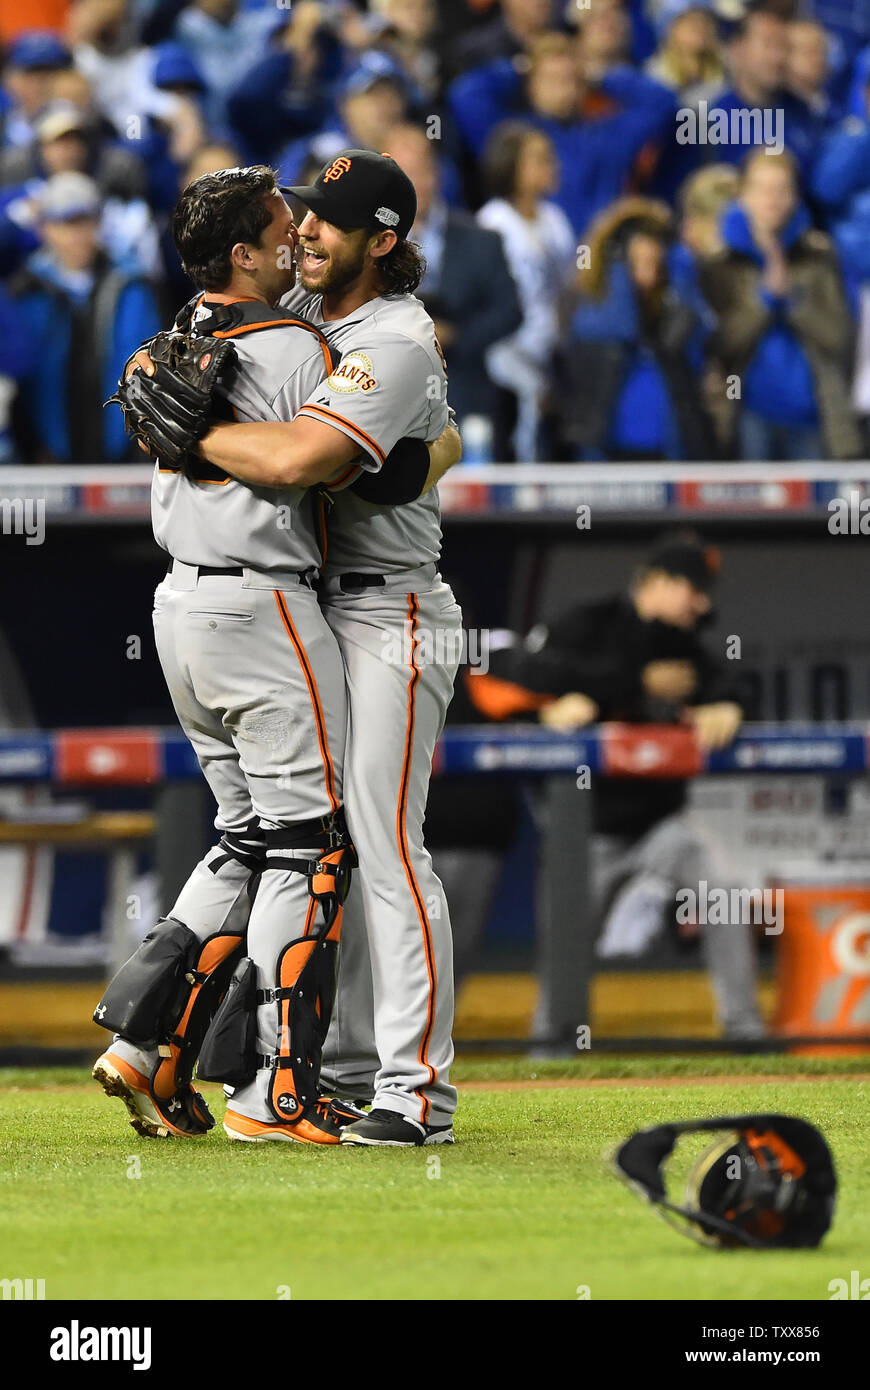 San Francisco Giants pitcher and World Series MVP Madison Bumgarner (R)  hugs his catcher Buster Posey after the final out in game 7 of the World  Series at Kauffman Stadium in Kansas